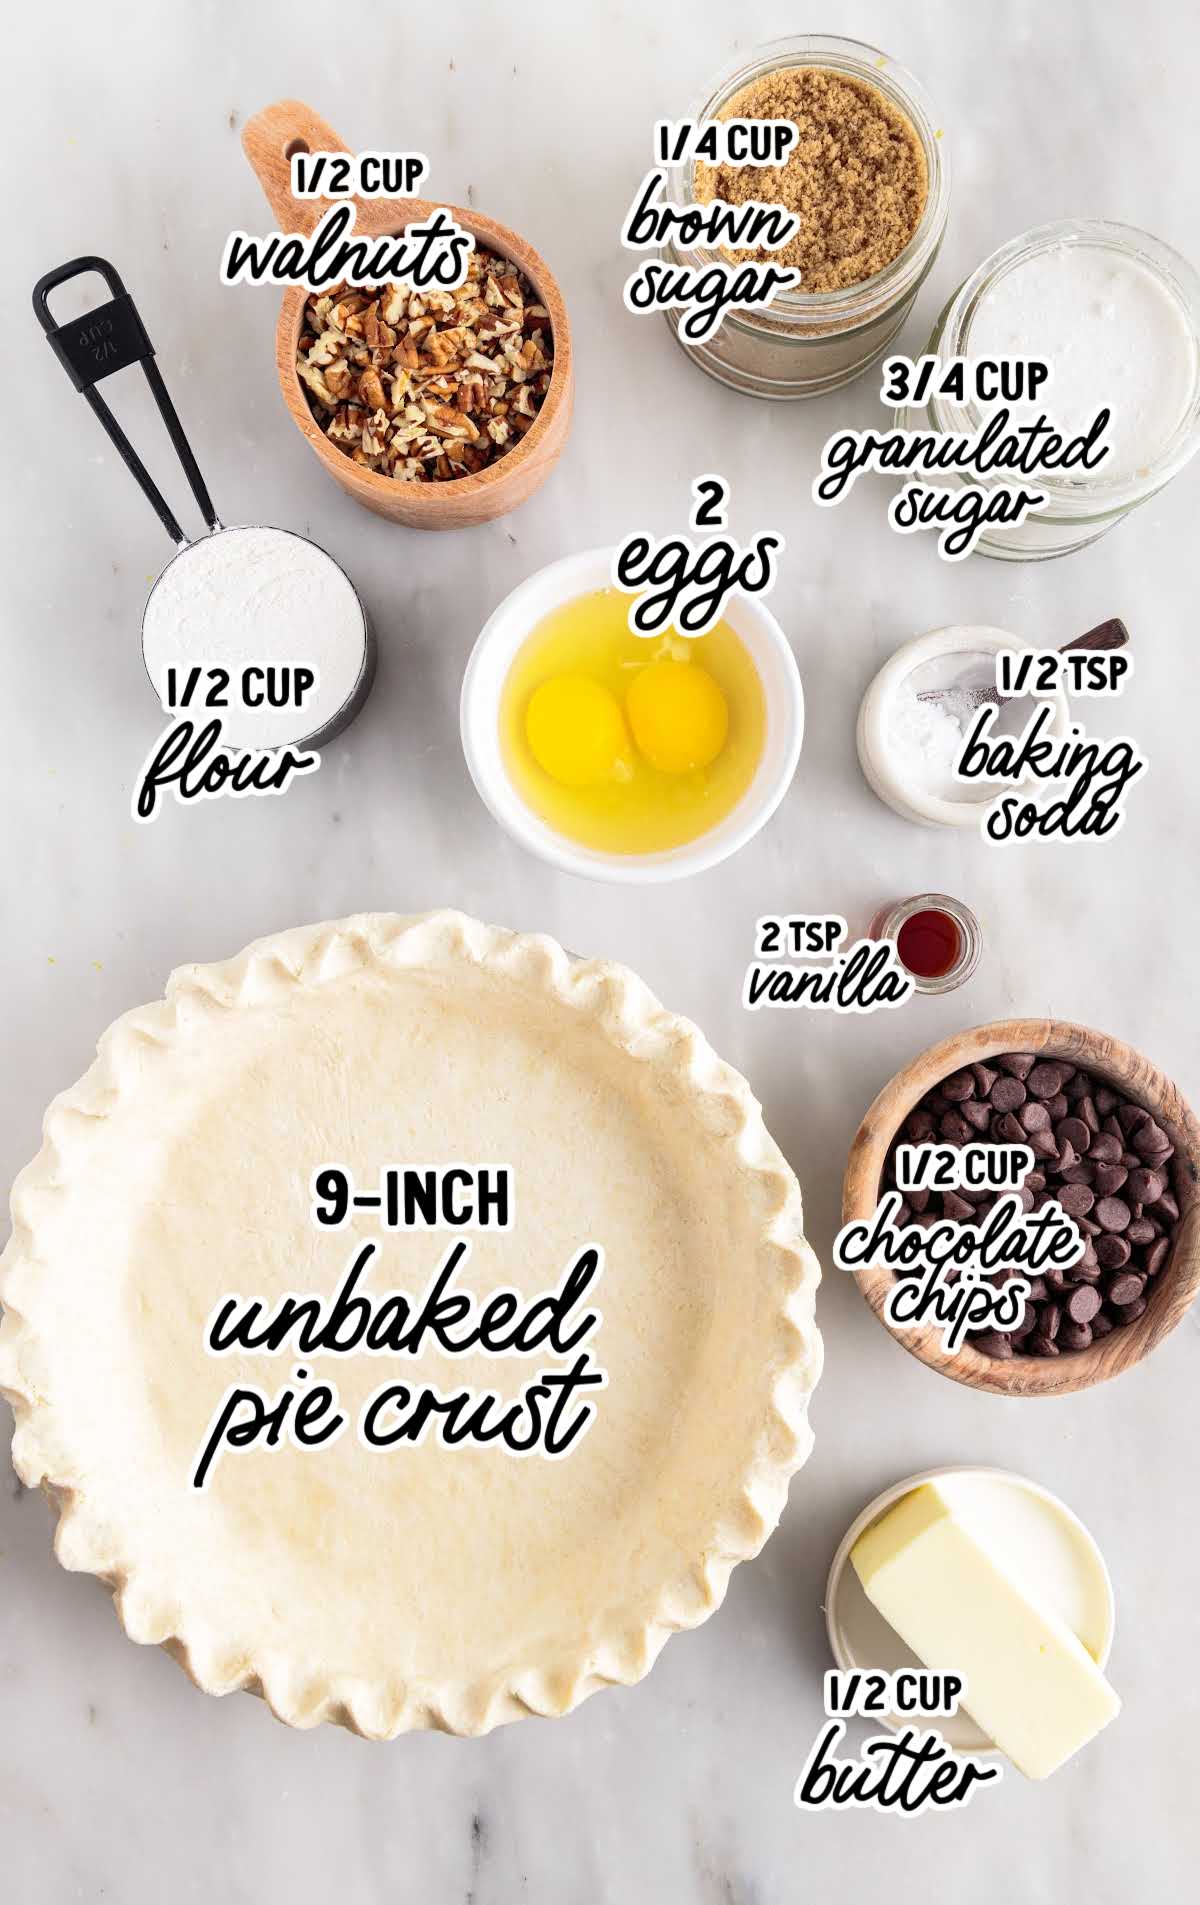 Chocolate Chip Pie raw ingredients that are labeled